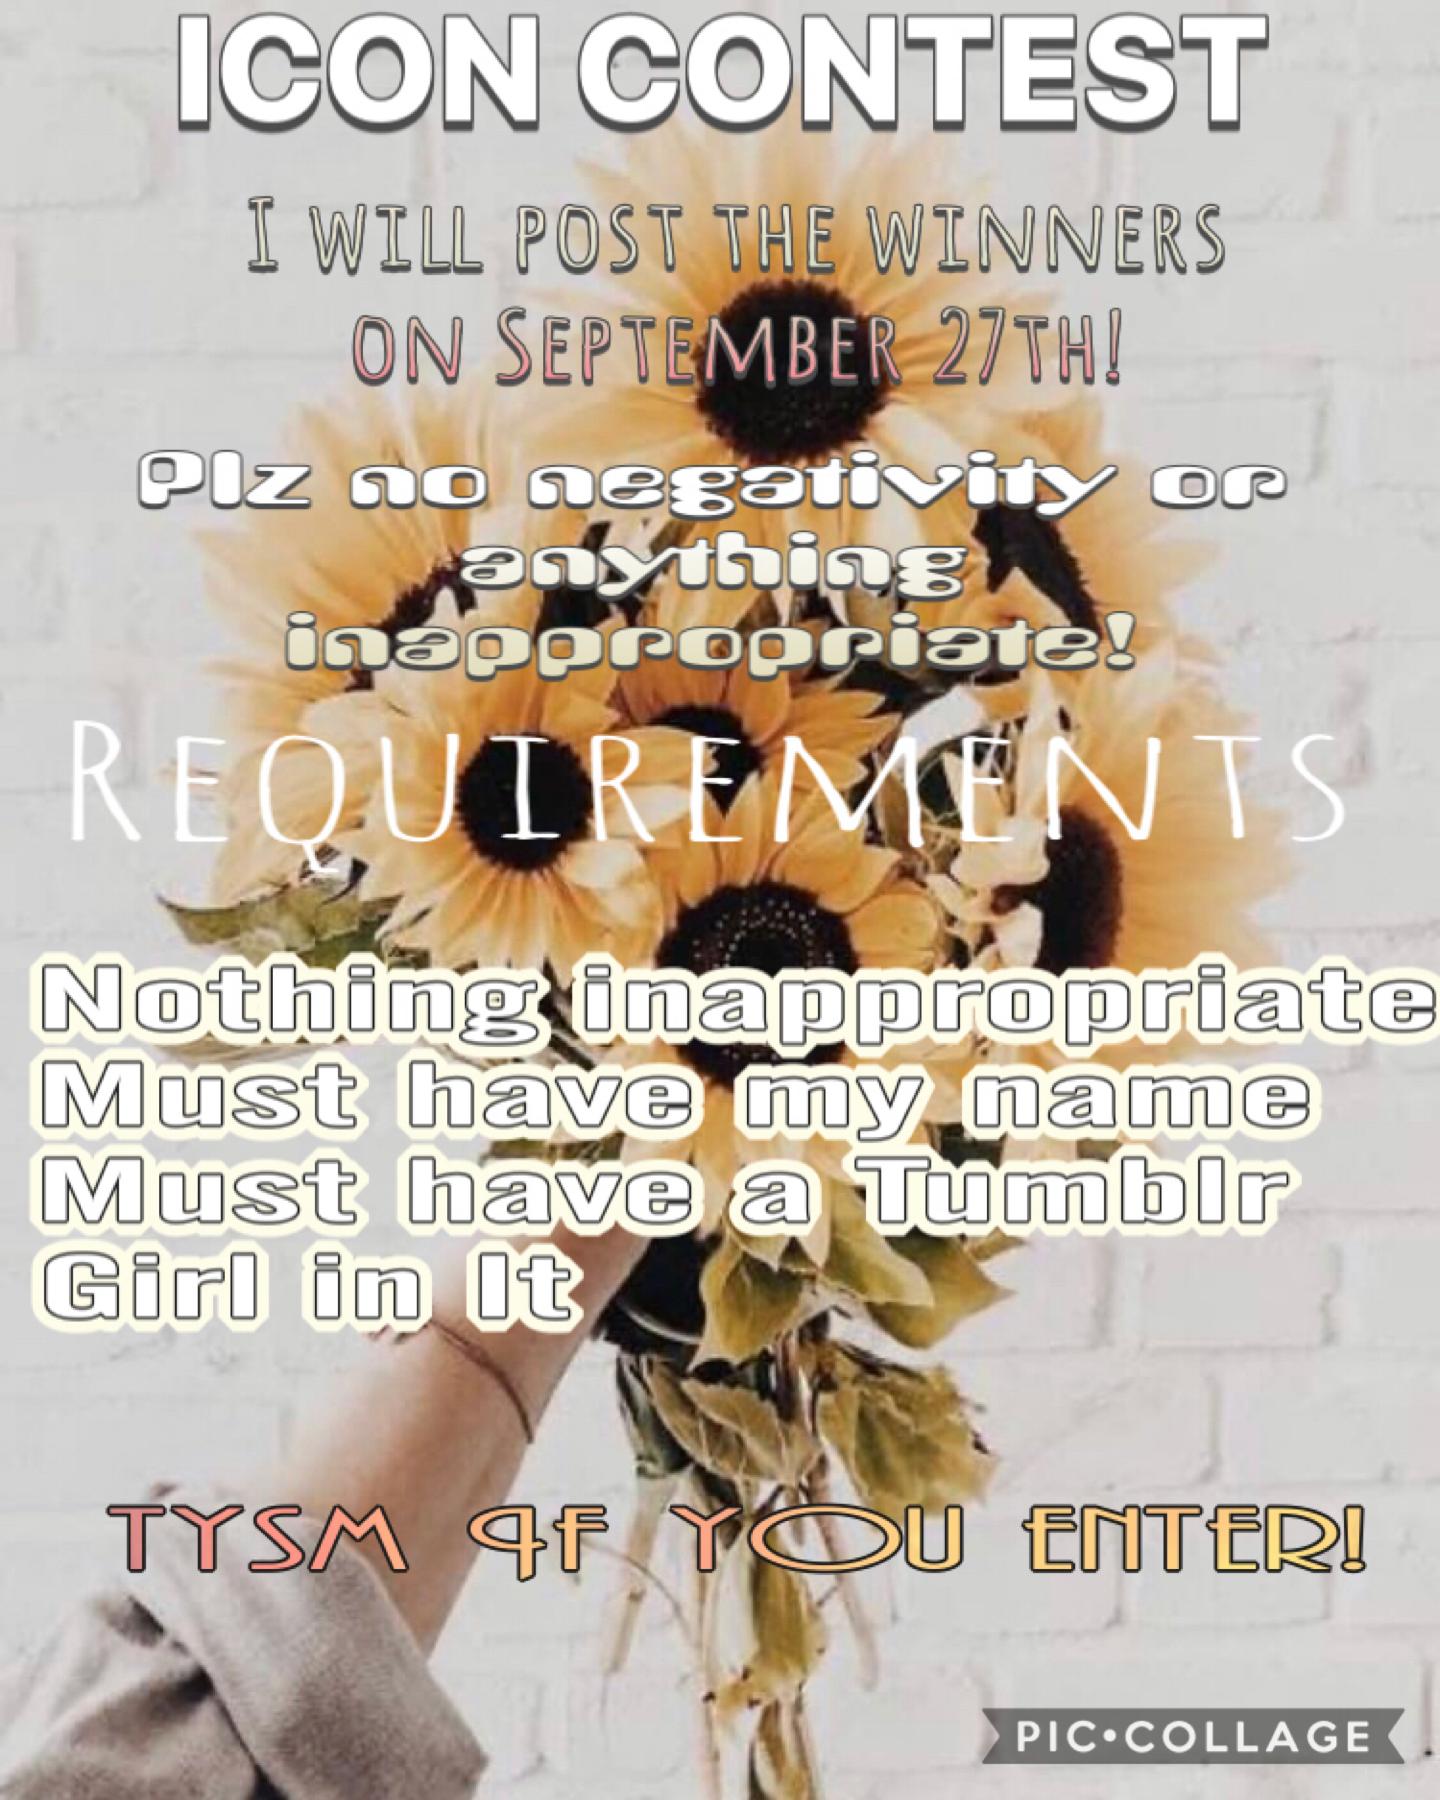 🌻💛Tap💛🌻




















































Tysm if you enter! I will post the prizes soon!💕